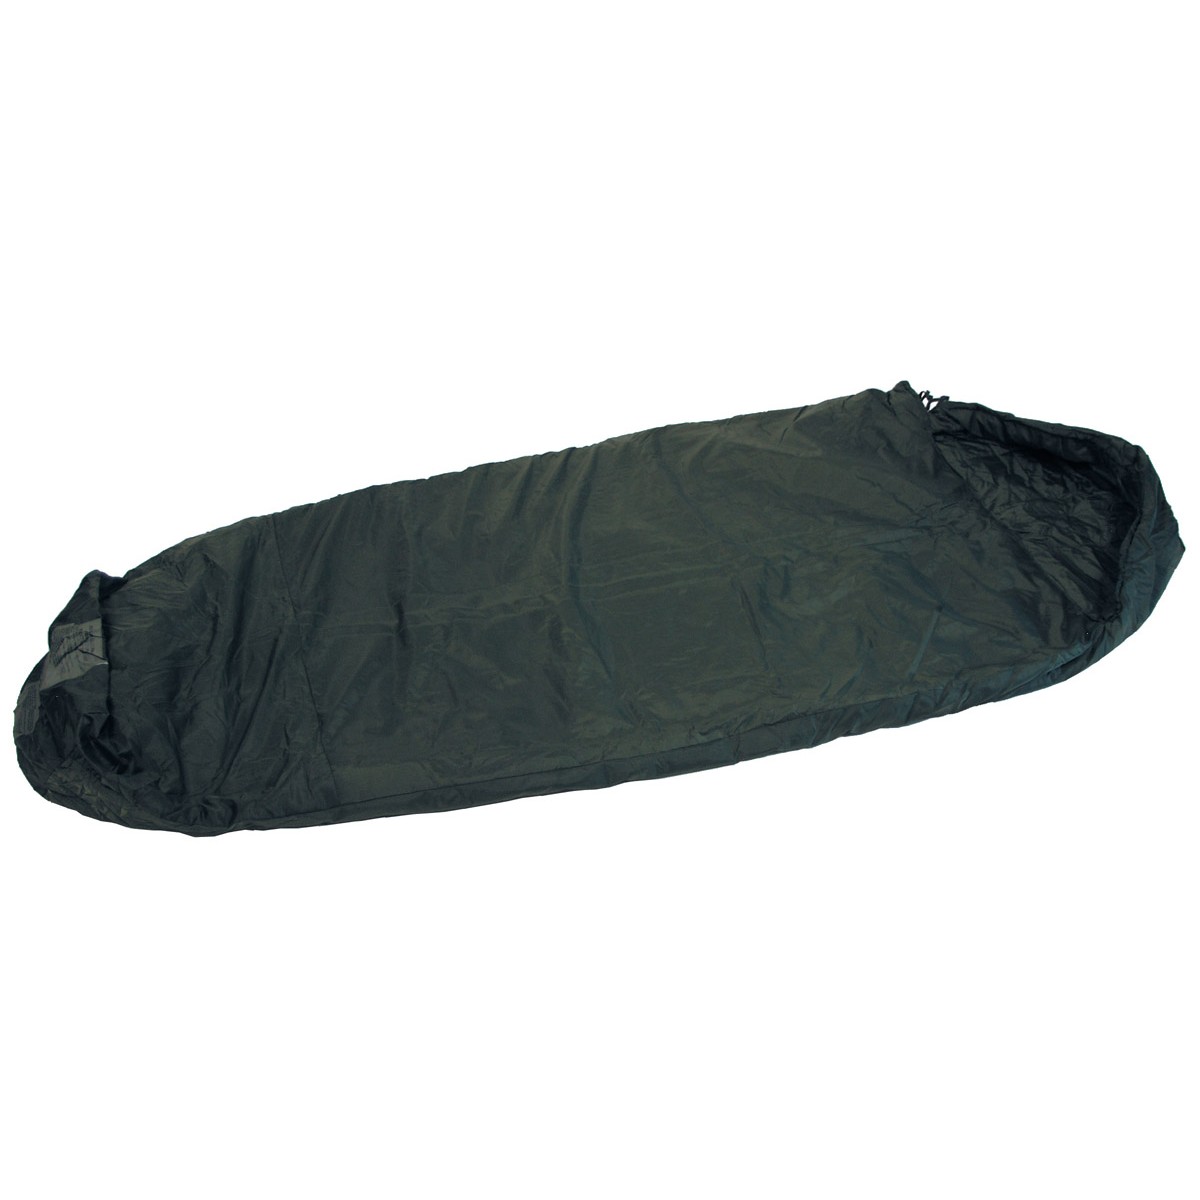 GI US Army Modular Sleeping System  ,Outer Part, "Petrol" - Green